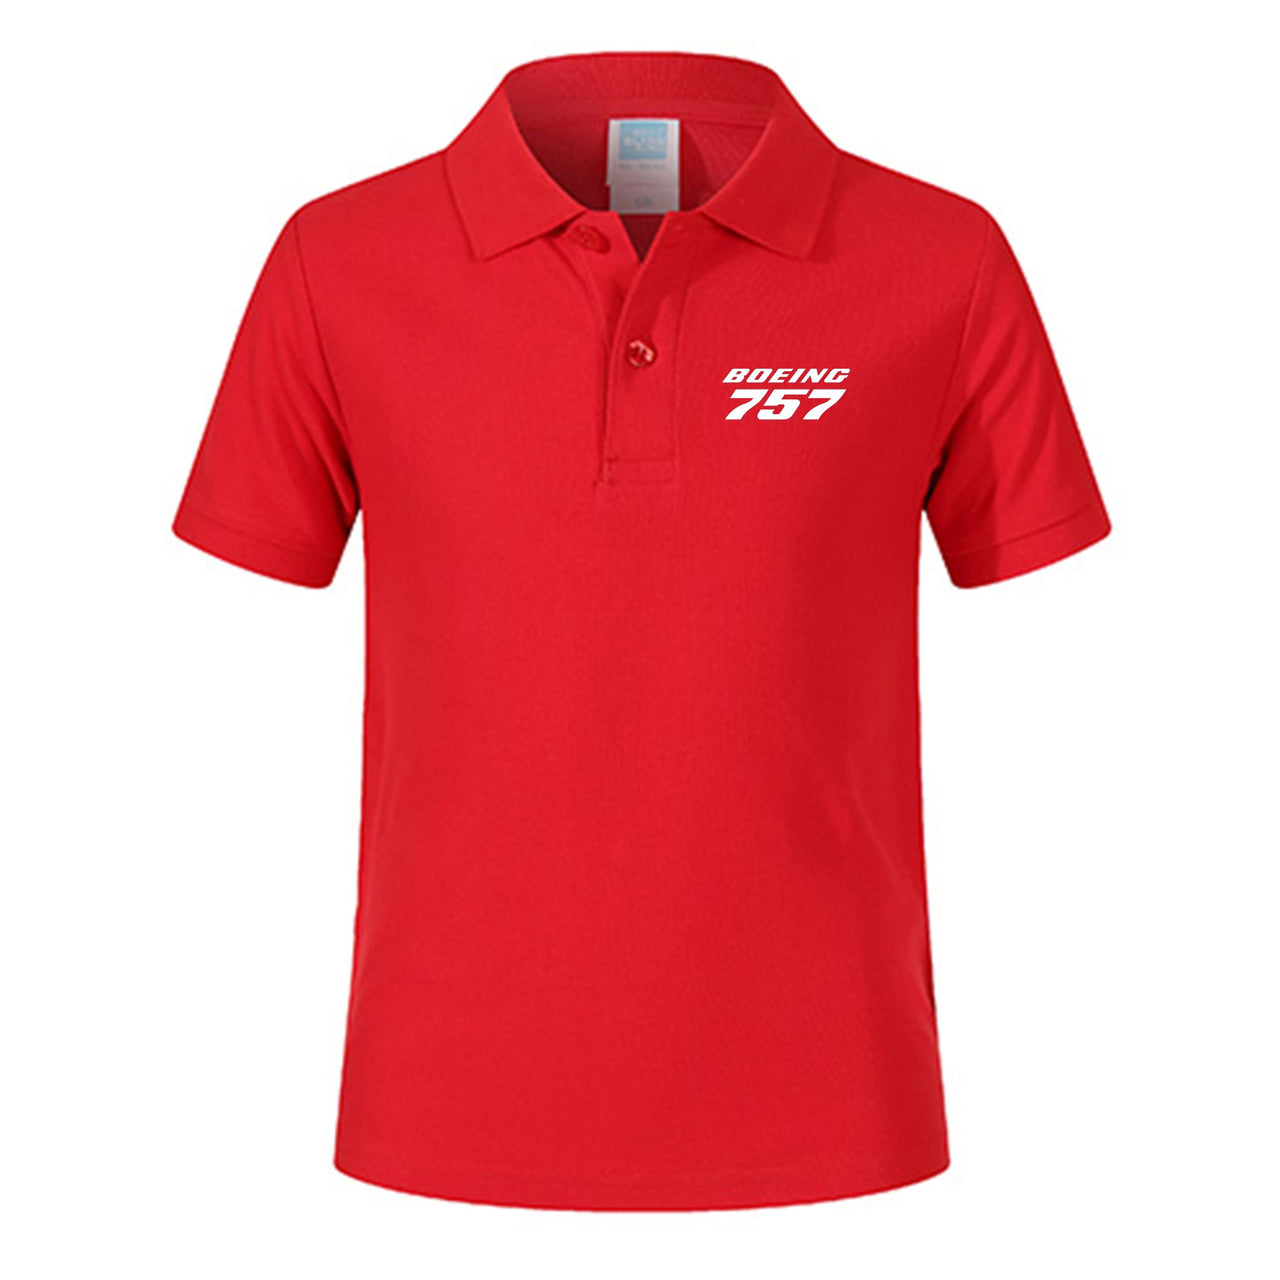 Boeing 757 & Text Designed Children Polo T-Shirts